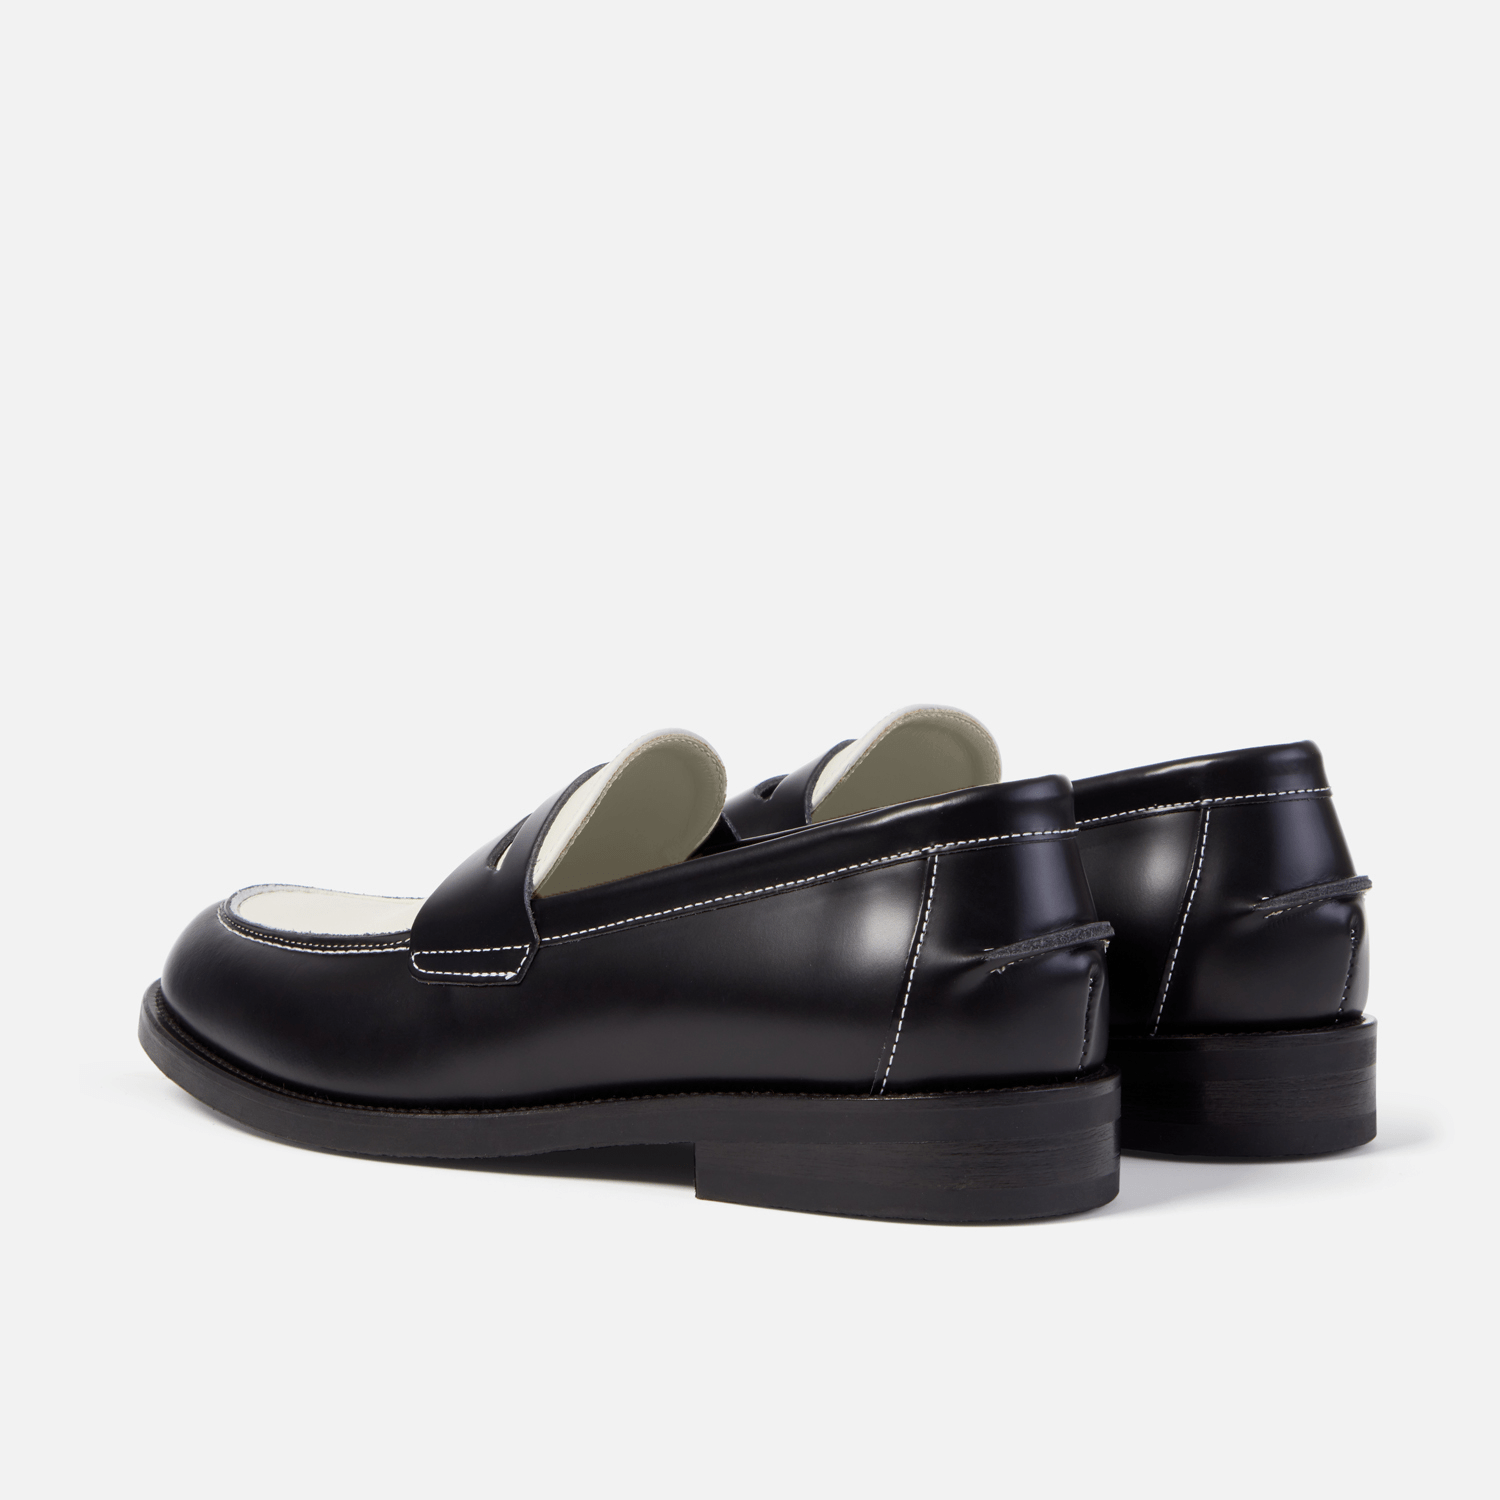 WILDE Black and White Leather Penny Loafer & DUKE + DEXTER